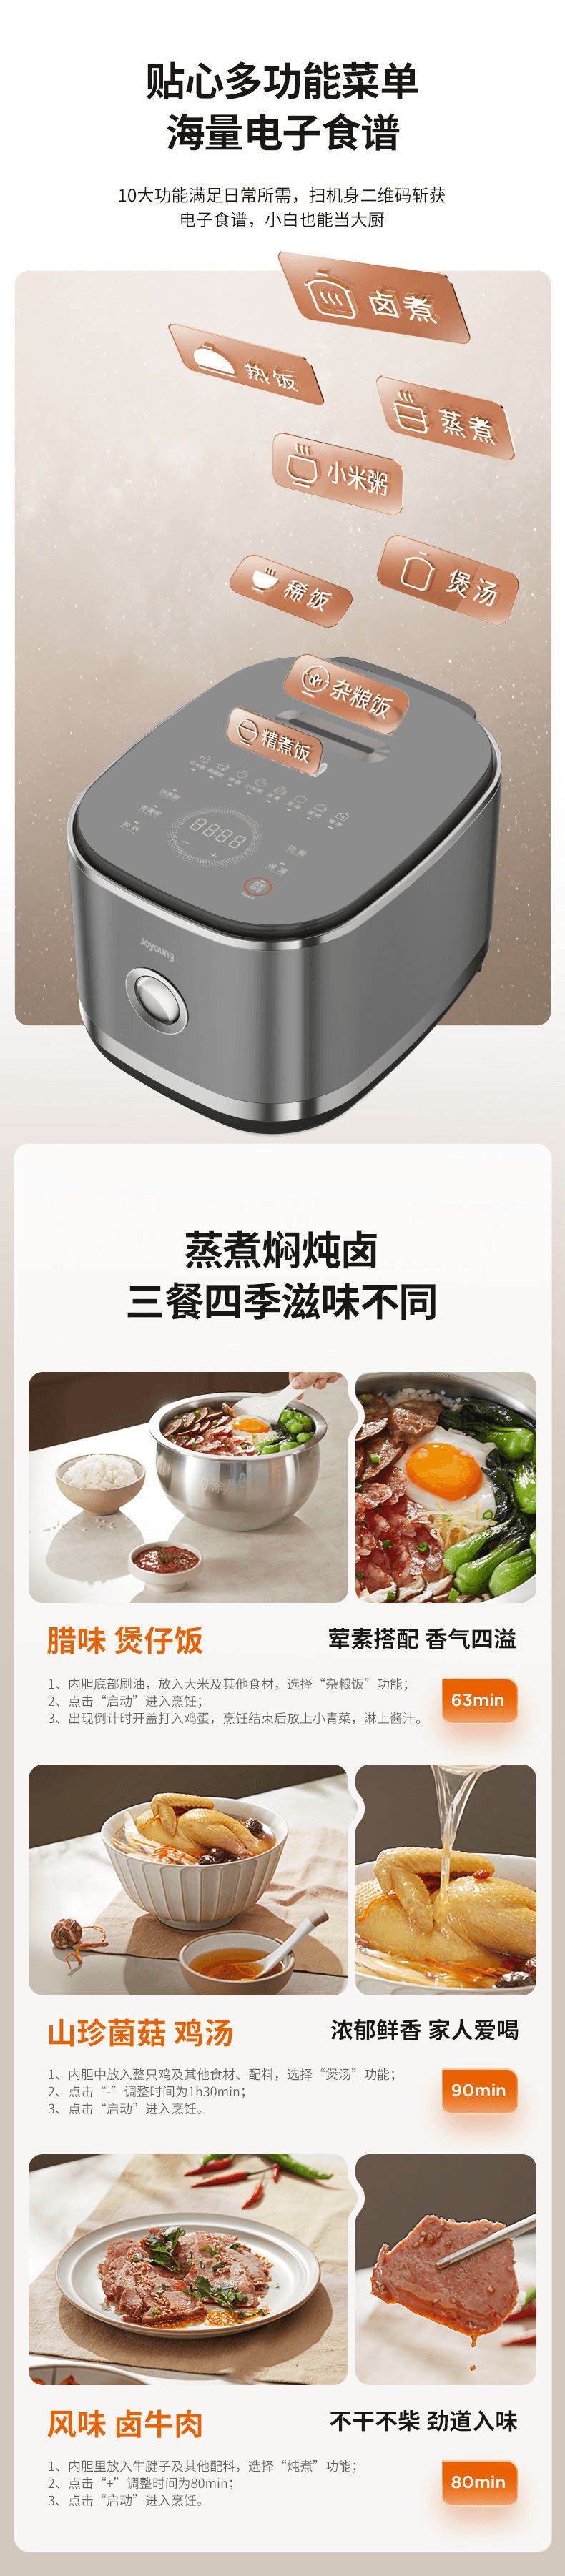 Joyoung's 2nd generation 0-coating IH heating rice cooker C8M-RC5G, 304 stainless steel inner pot, 4L uncoated multi-function rice cooker, high-quality domestic product - YOURISHOP.COM